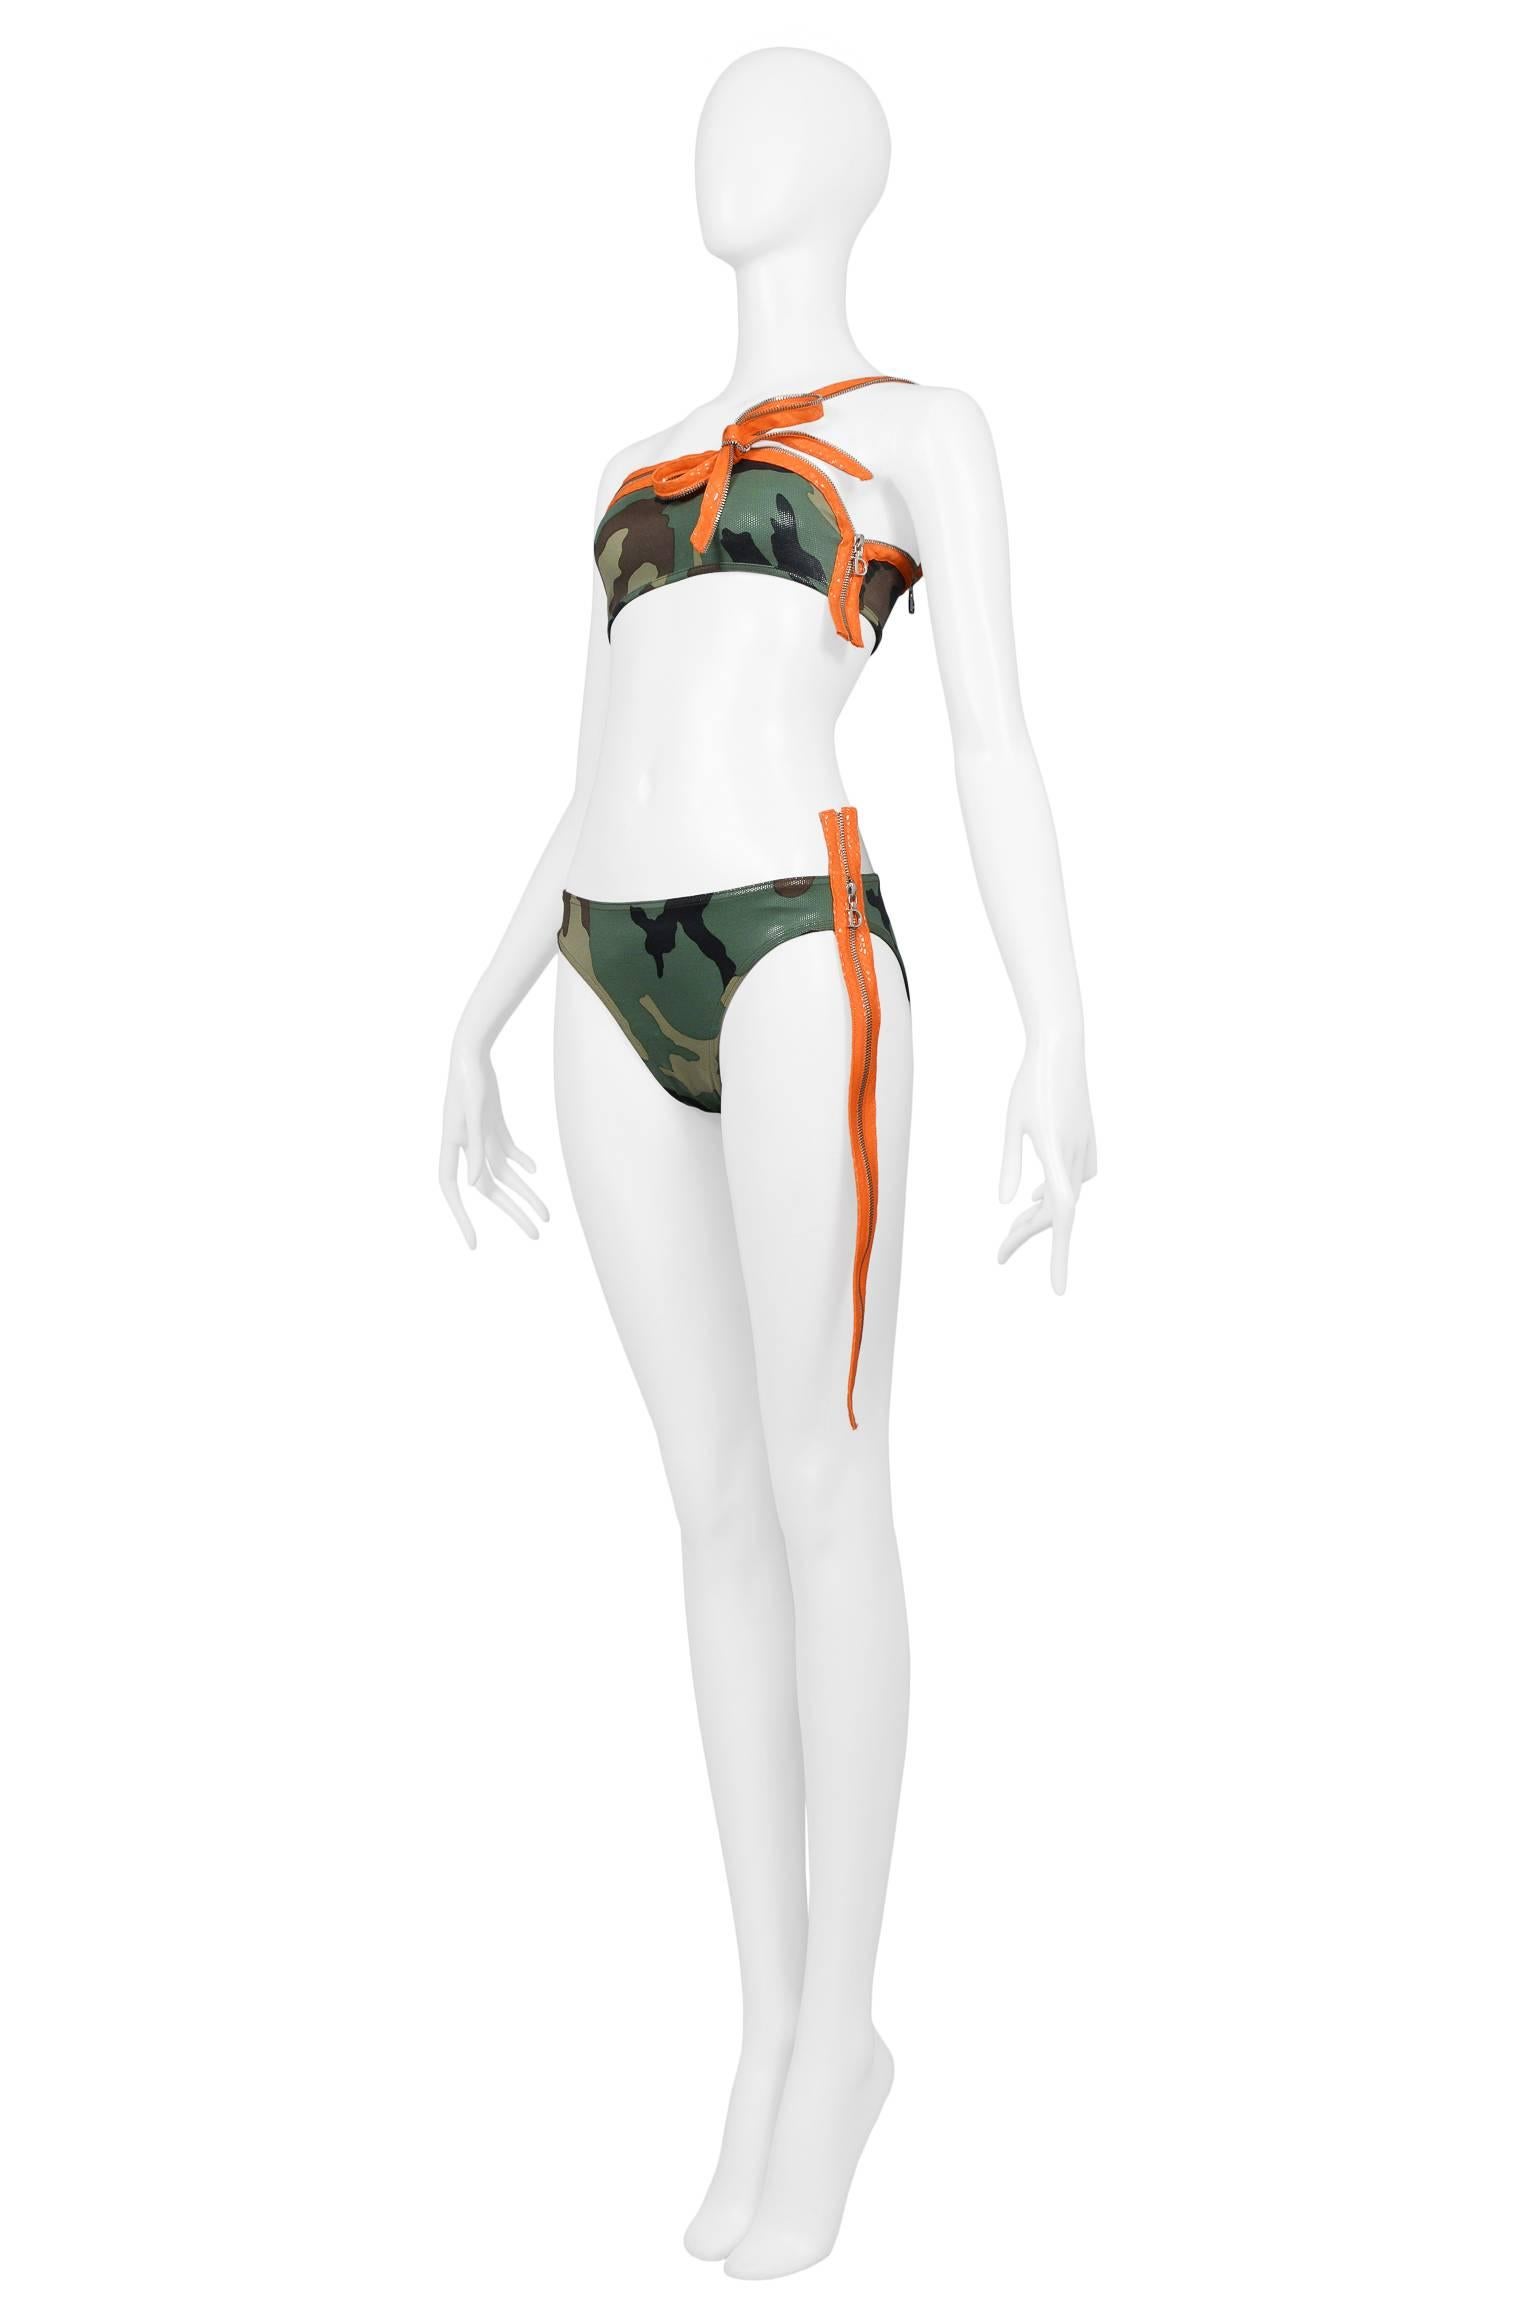 Christian Dior by John Galliano camouflage bikini with orange utility straps with zippers at bust and hip. Never been worn. New Vintage. Featured on the runway and advertising. Collection SS 2001.